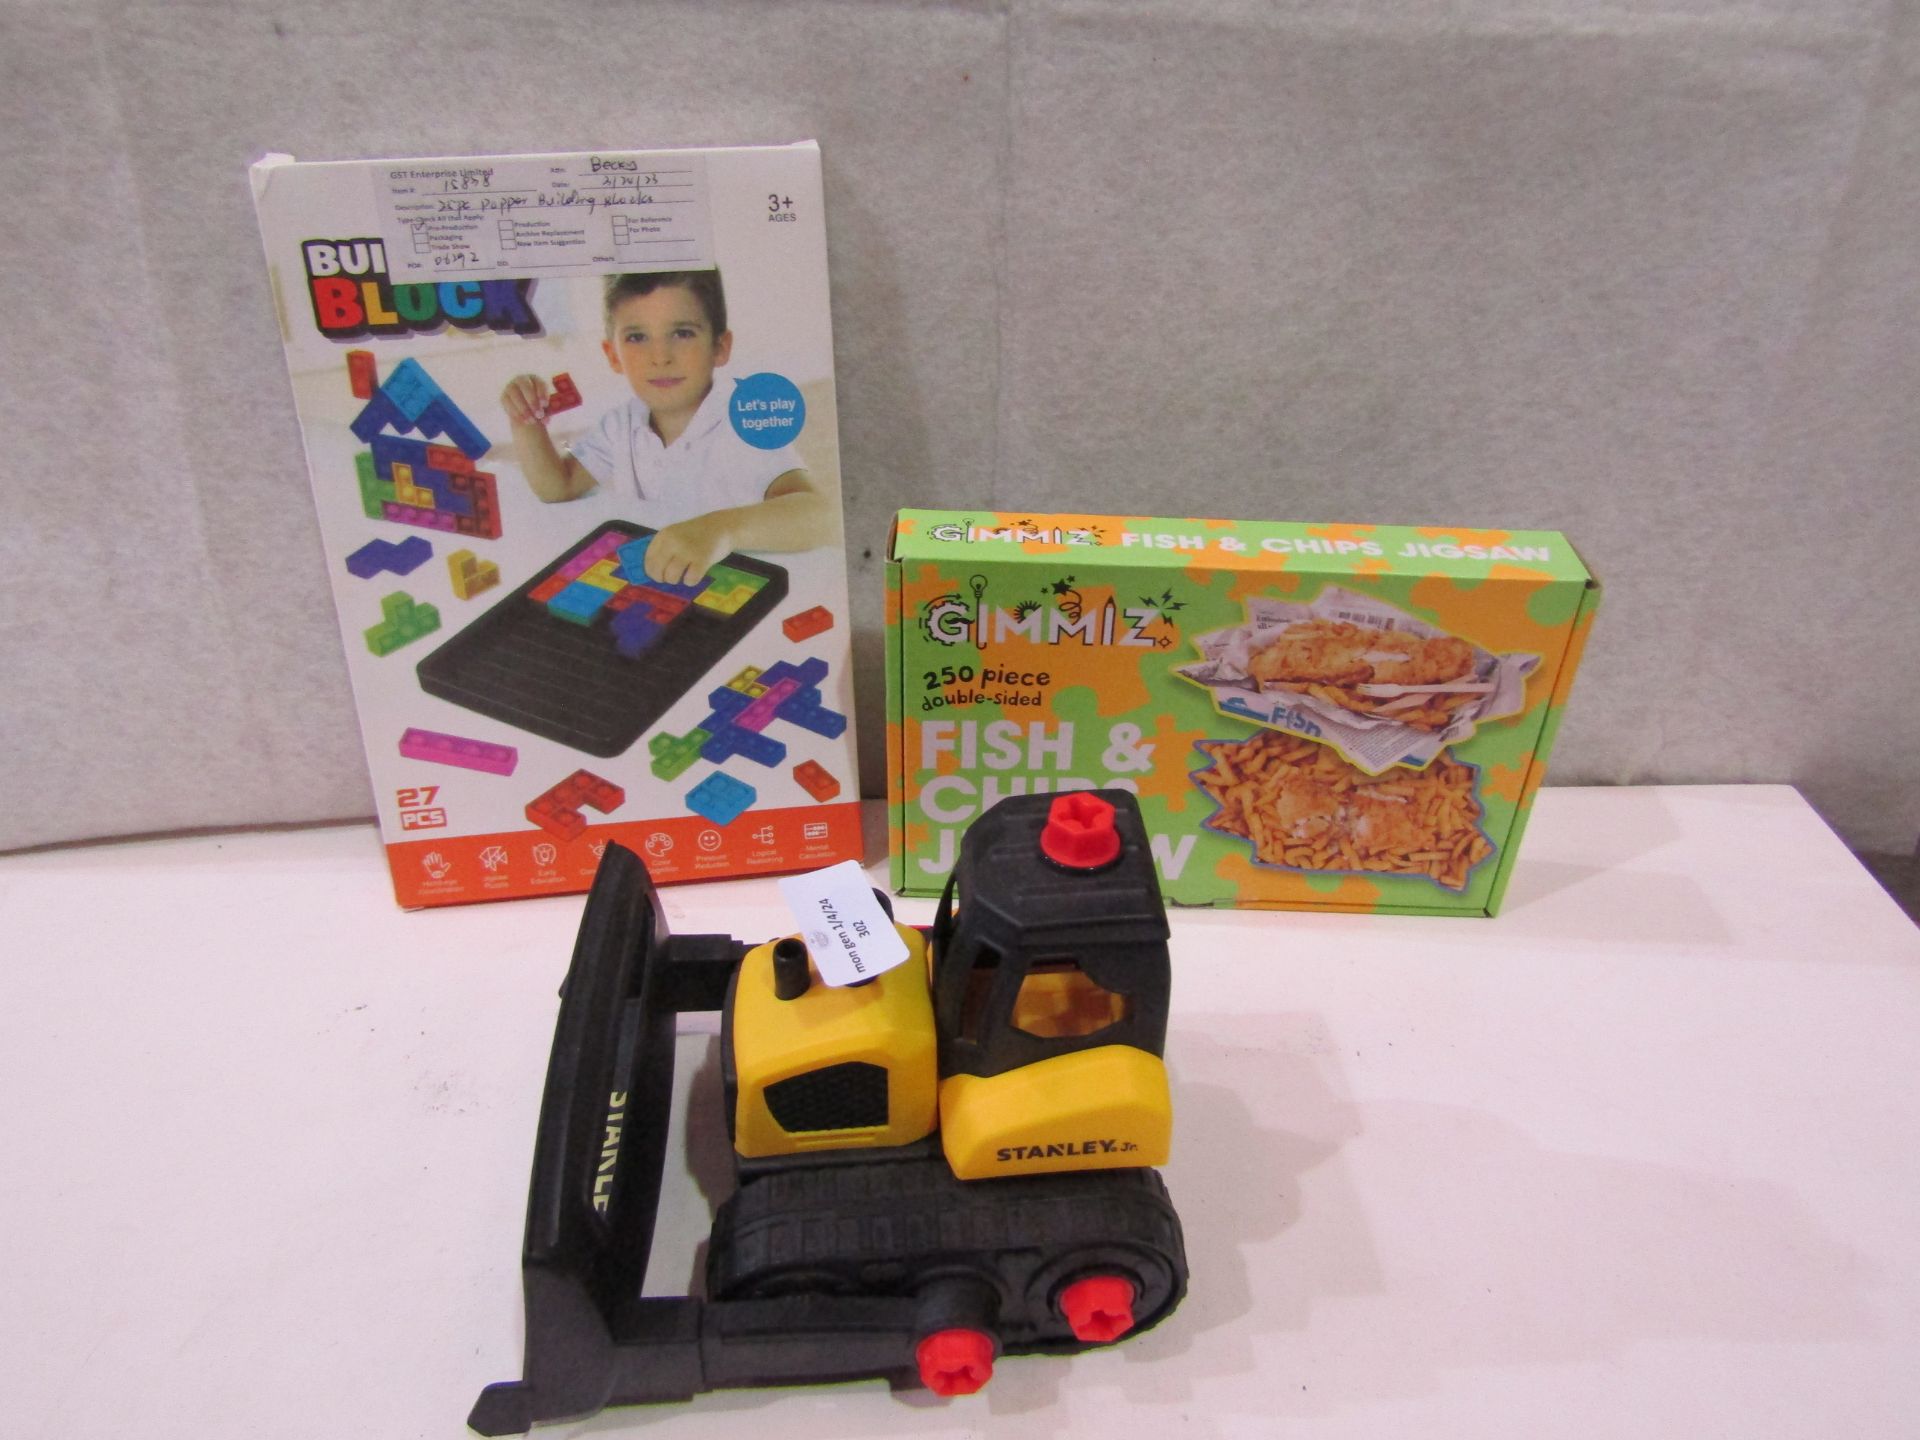 3 X Items Being 1 X Building Blocks 1 X Stanley Digger & 1 X Fish & Chips Jigsaw 250 PC All